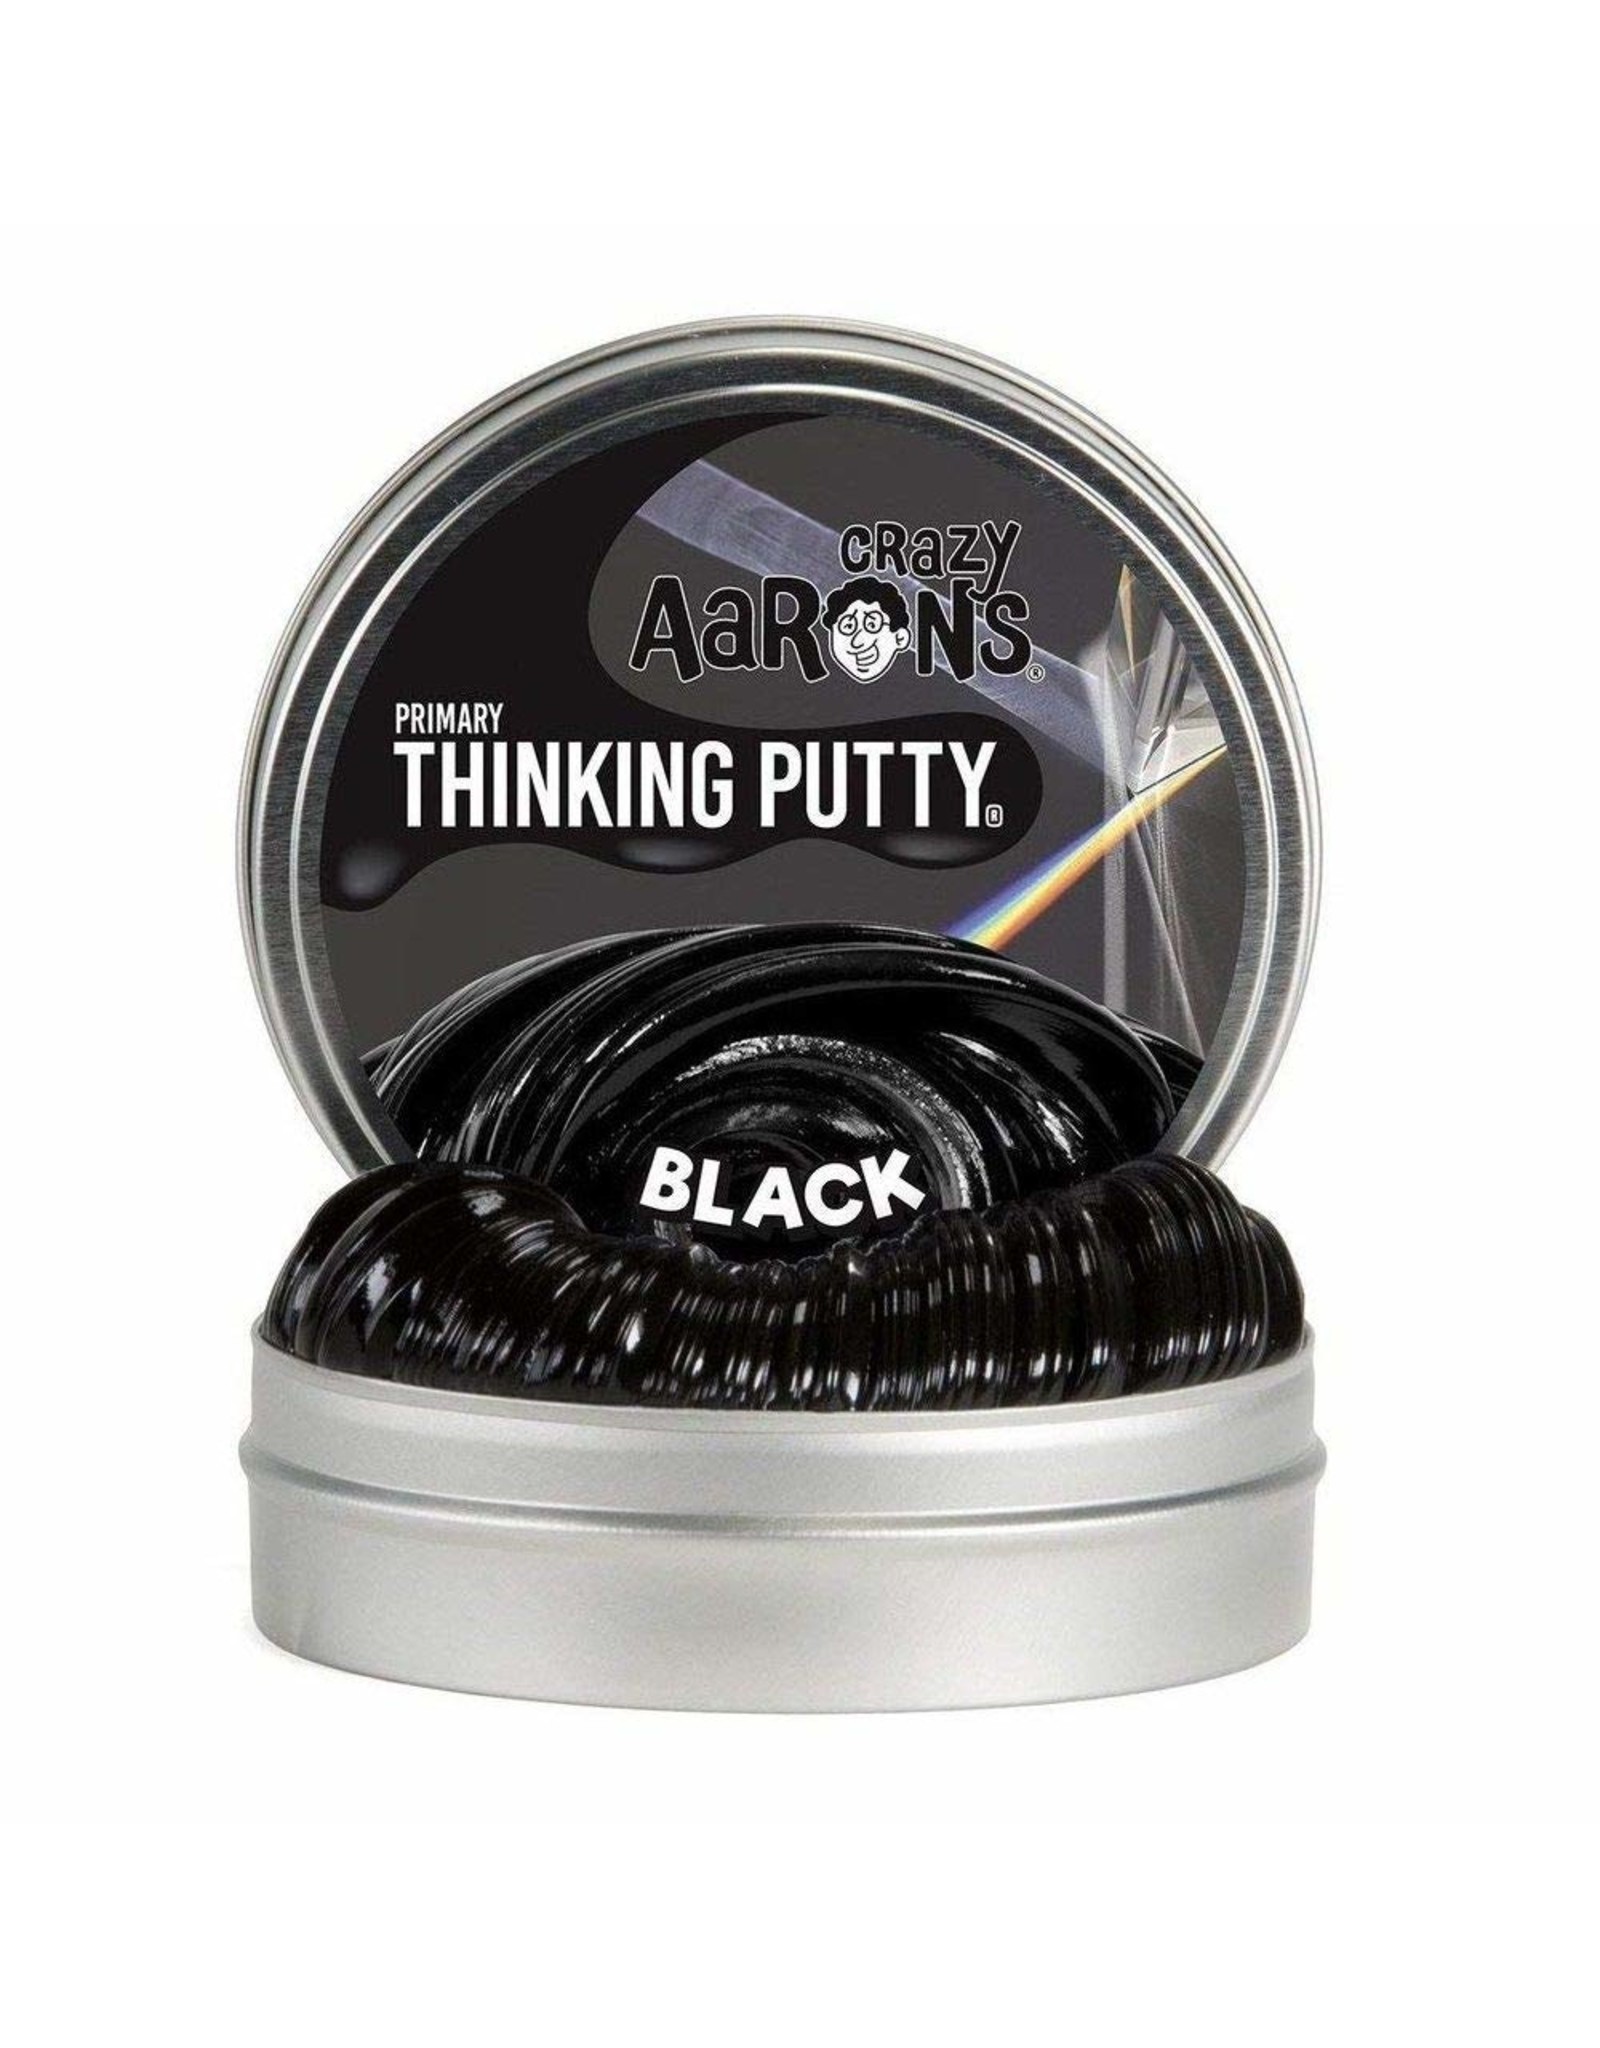 crazy aaron's mini electric thinking putty